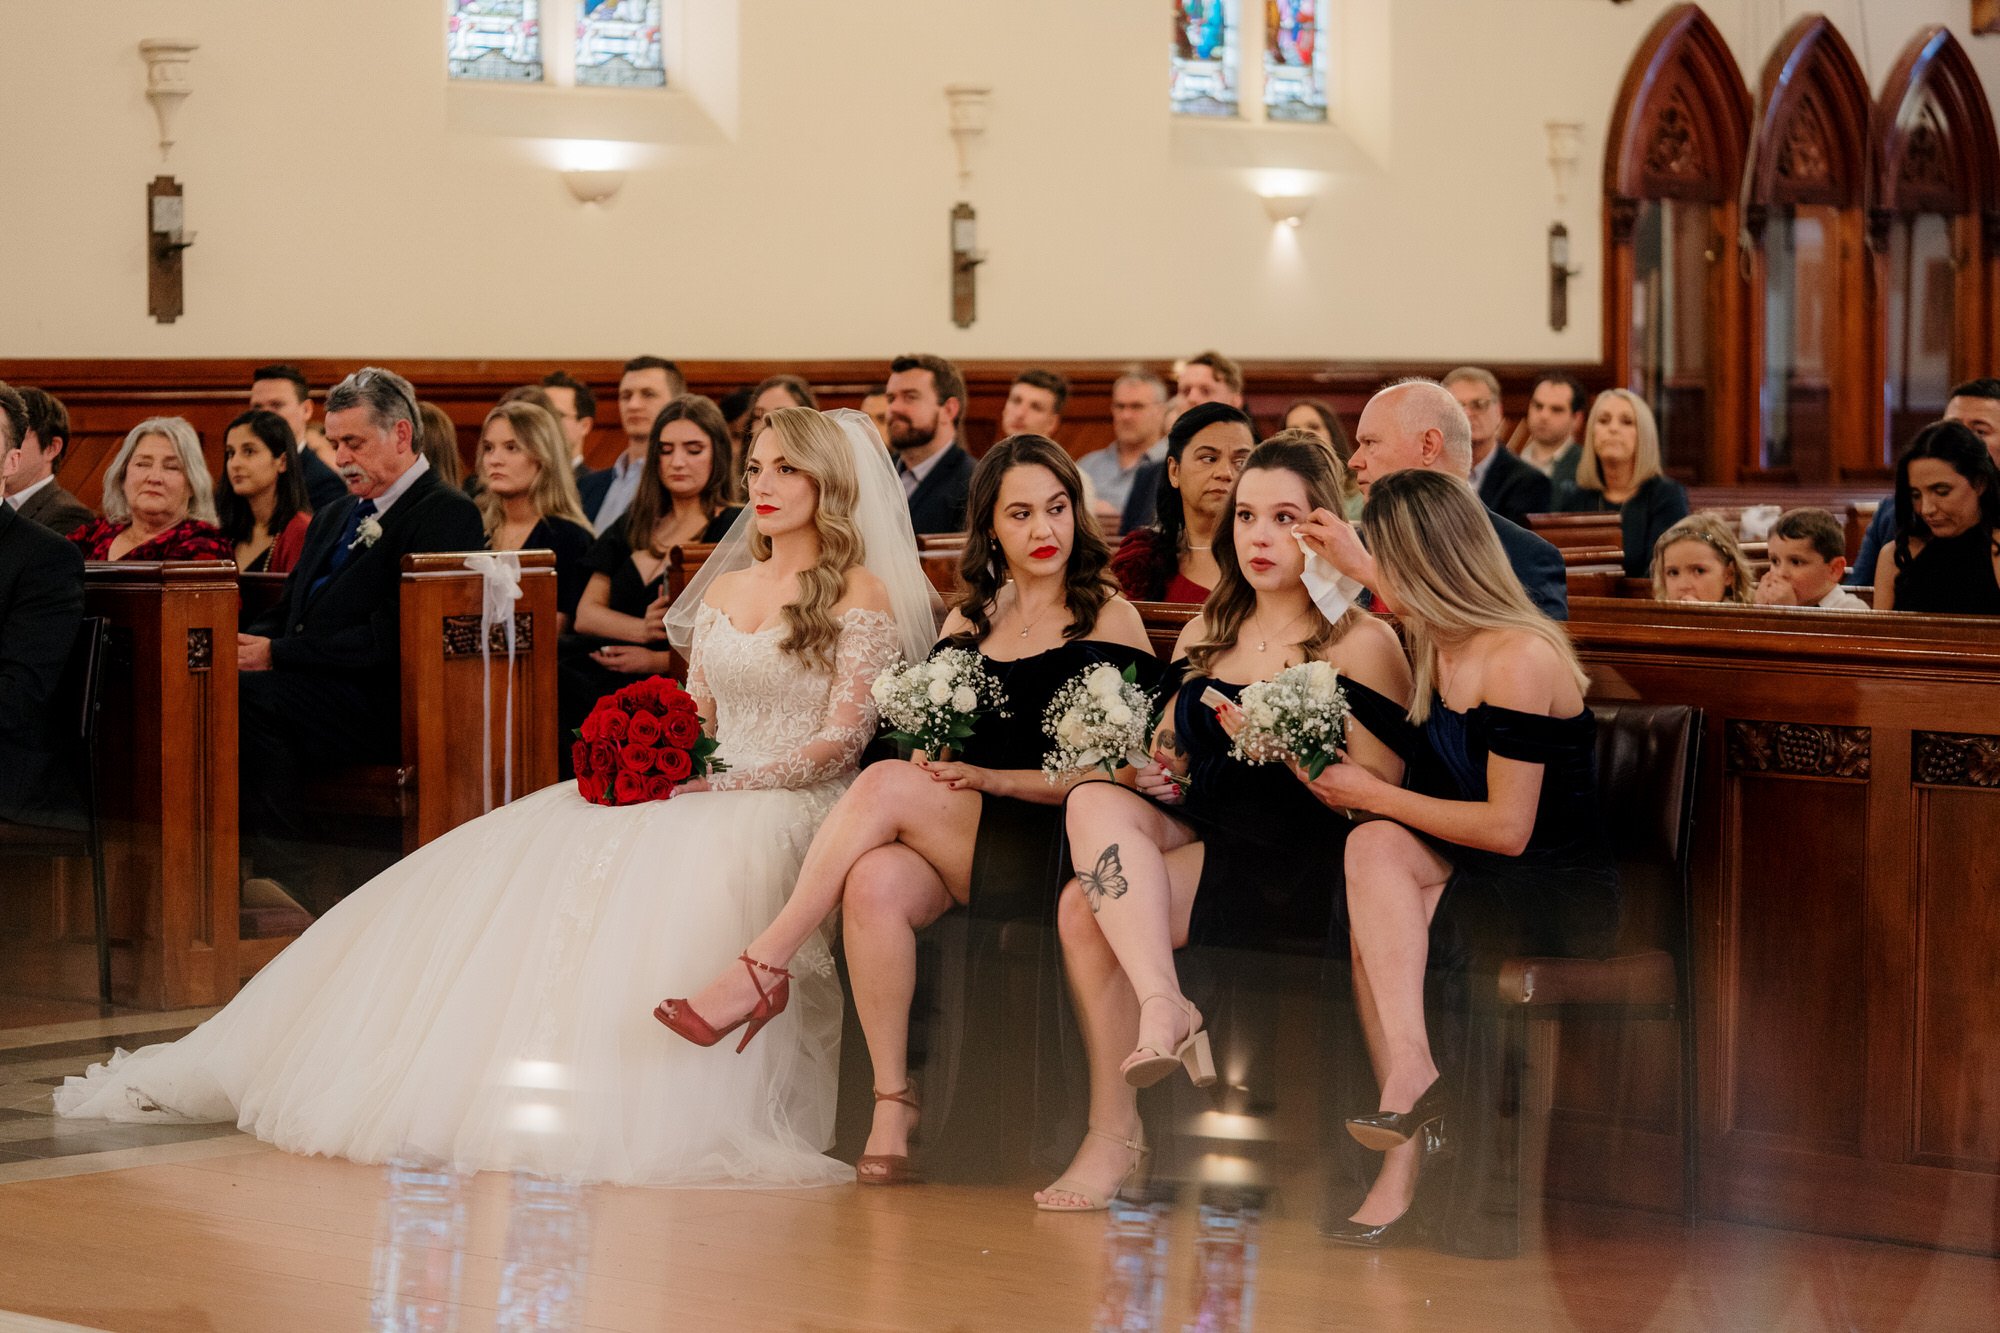 mantells-mt-eden-st-patricks-cathedral-alberton-house-top-auckland-wedding-phtographer-2023-photography-videography-film-new-zealand-NZ-best-urban-venue-catholic-ceremony-dear-white-productions (173).jpg